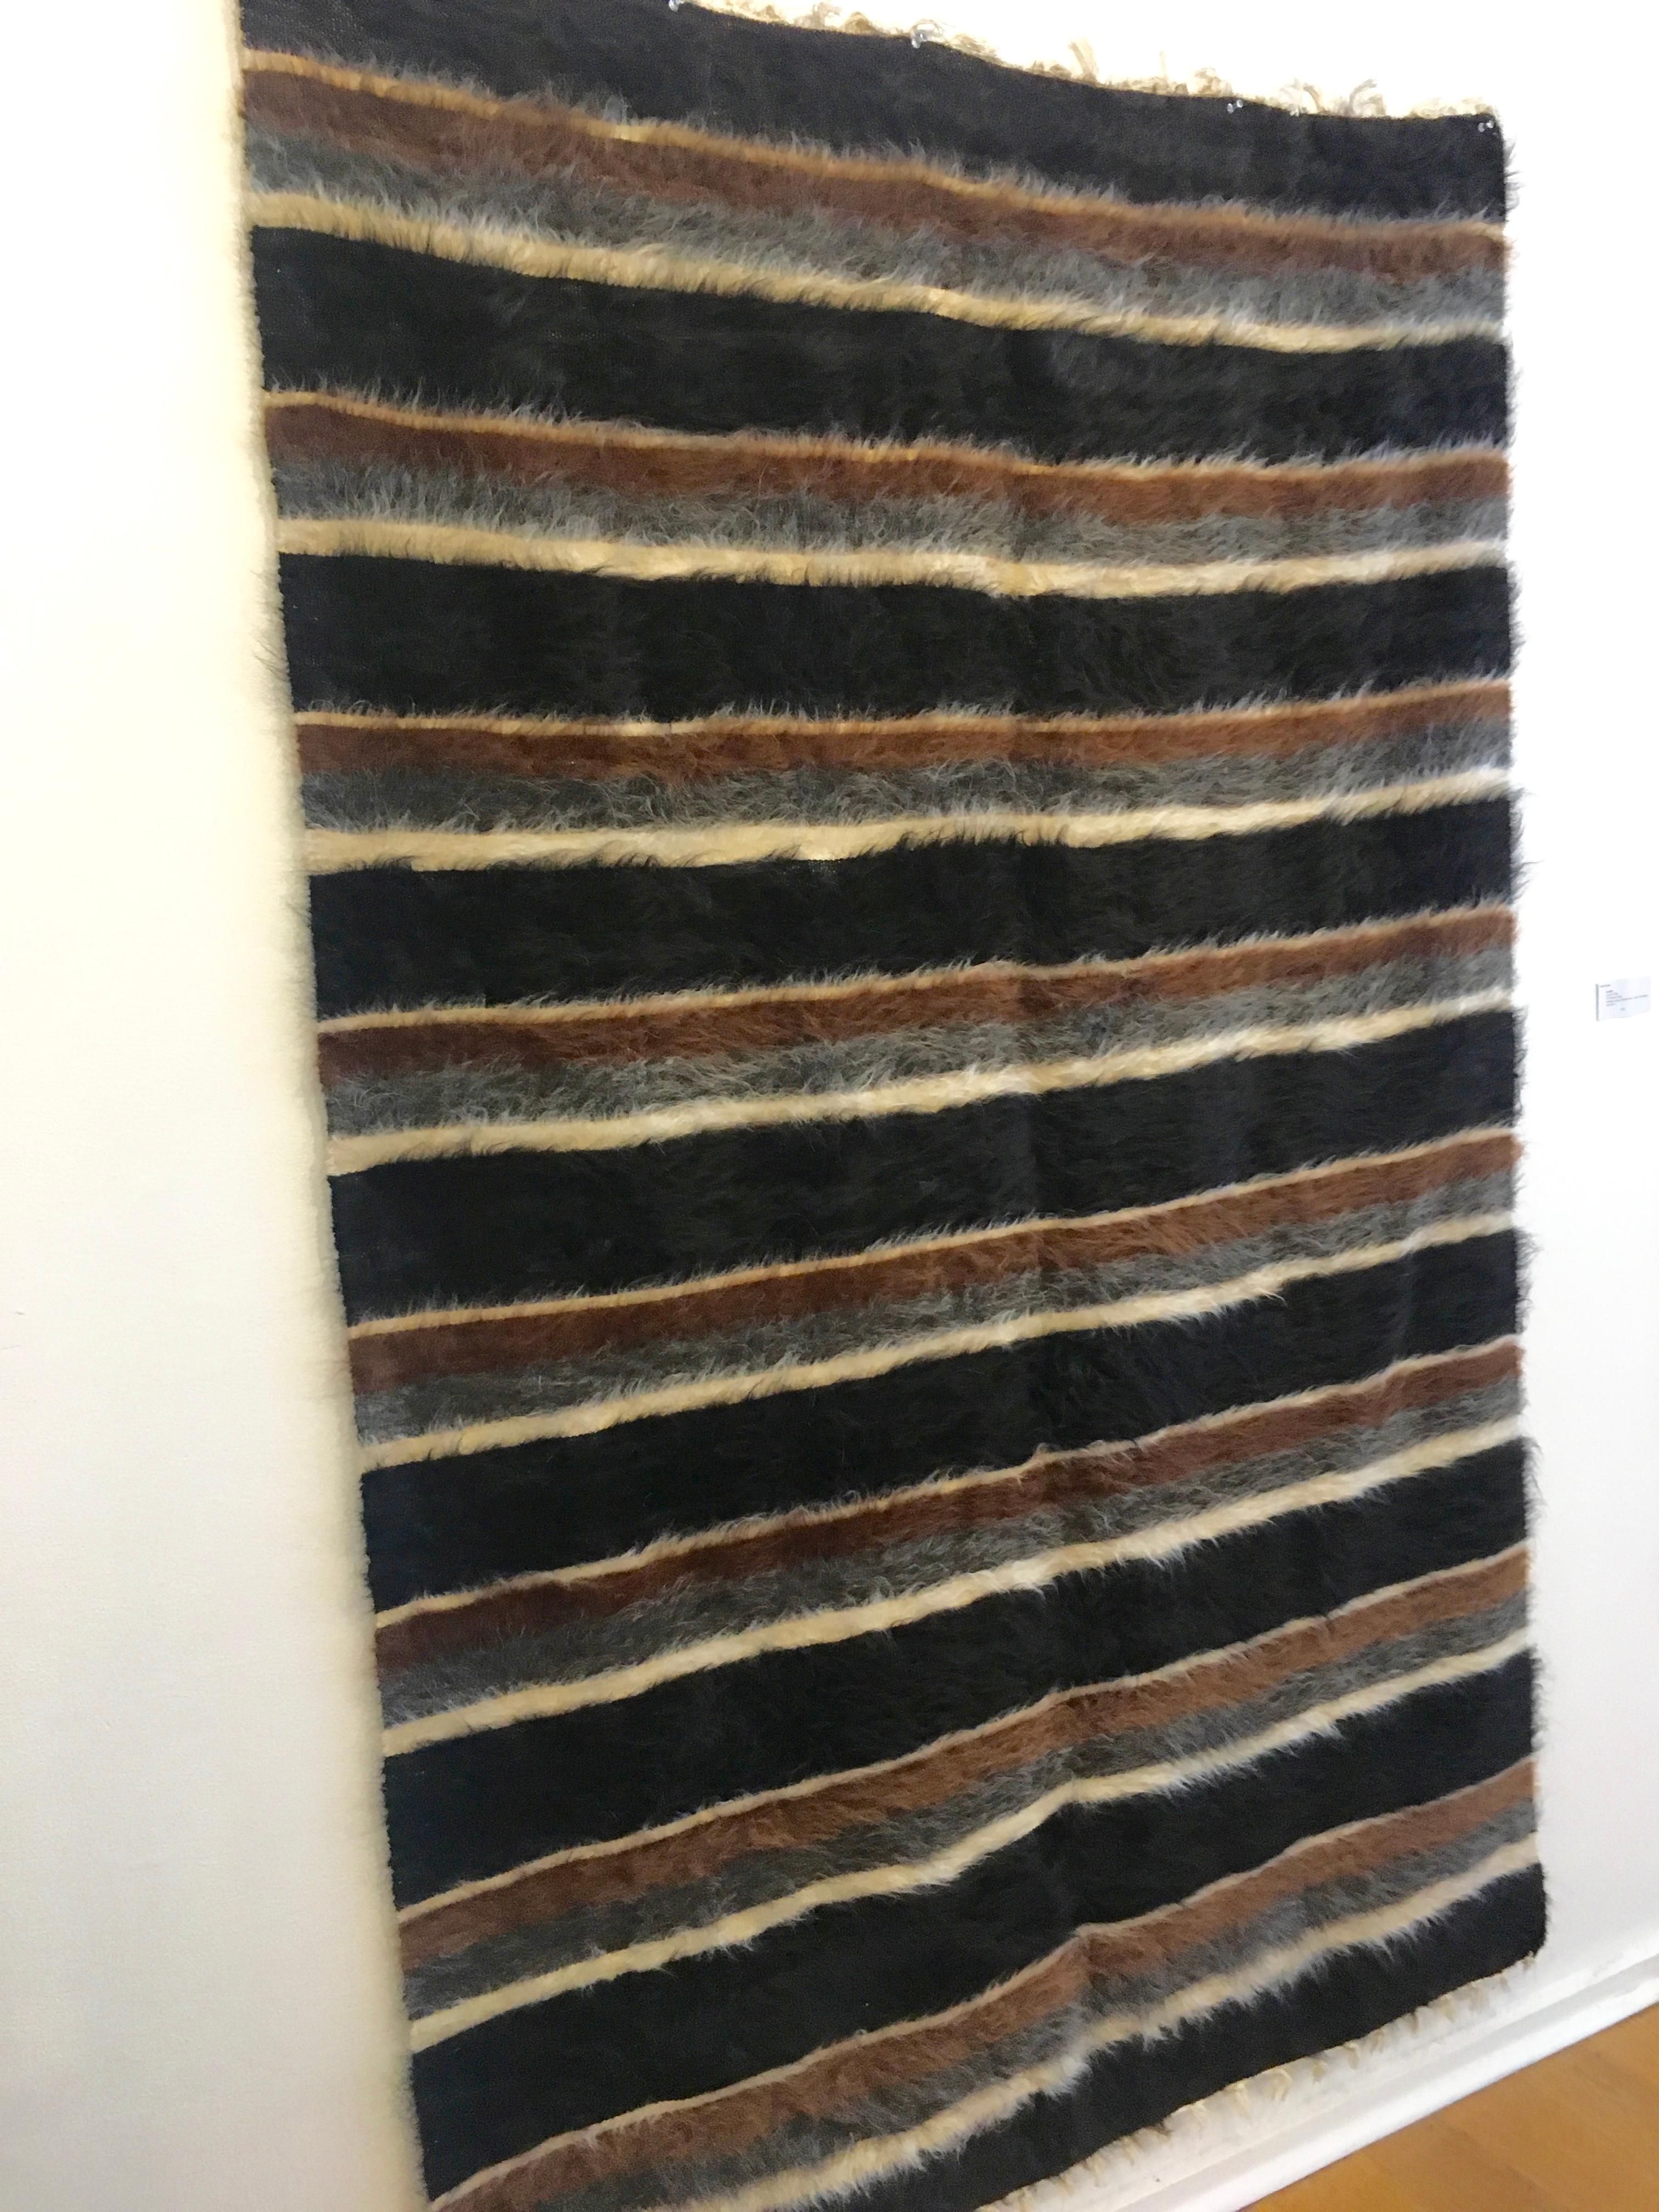 Turkish Soft Blanket Rug with Stripes. Natural Goat Hair Pile, Cotton Foundation. For Sale